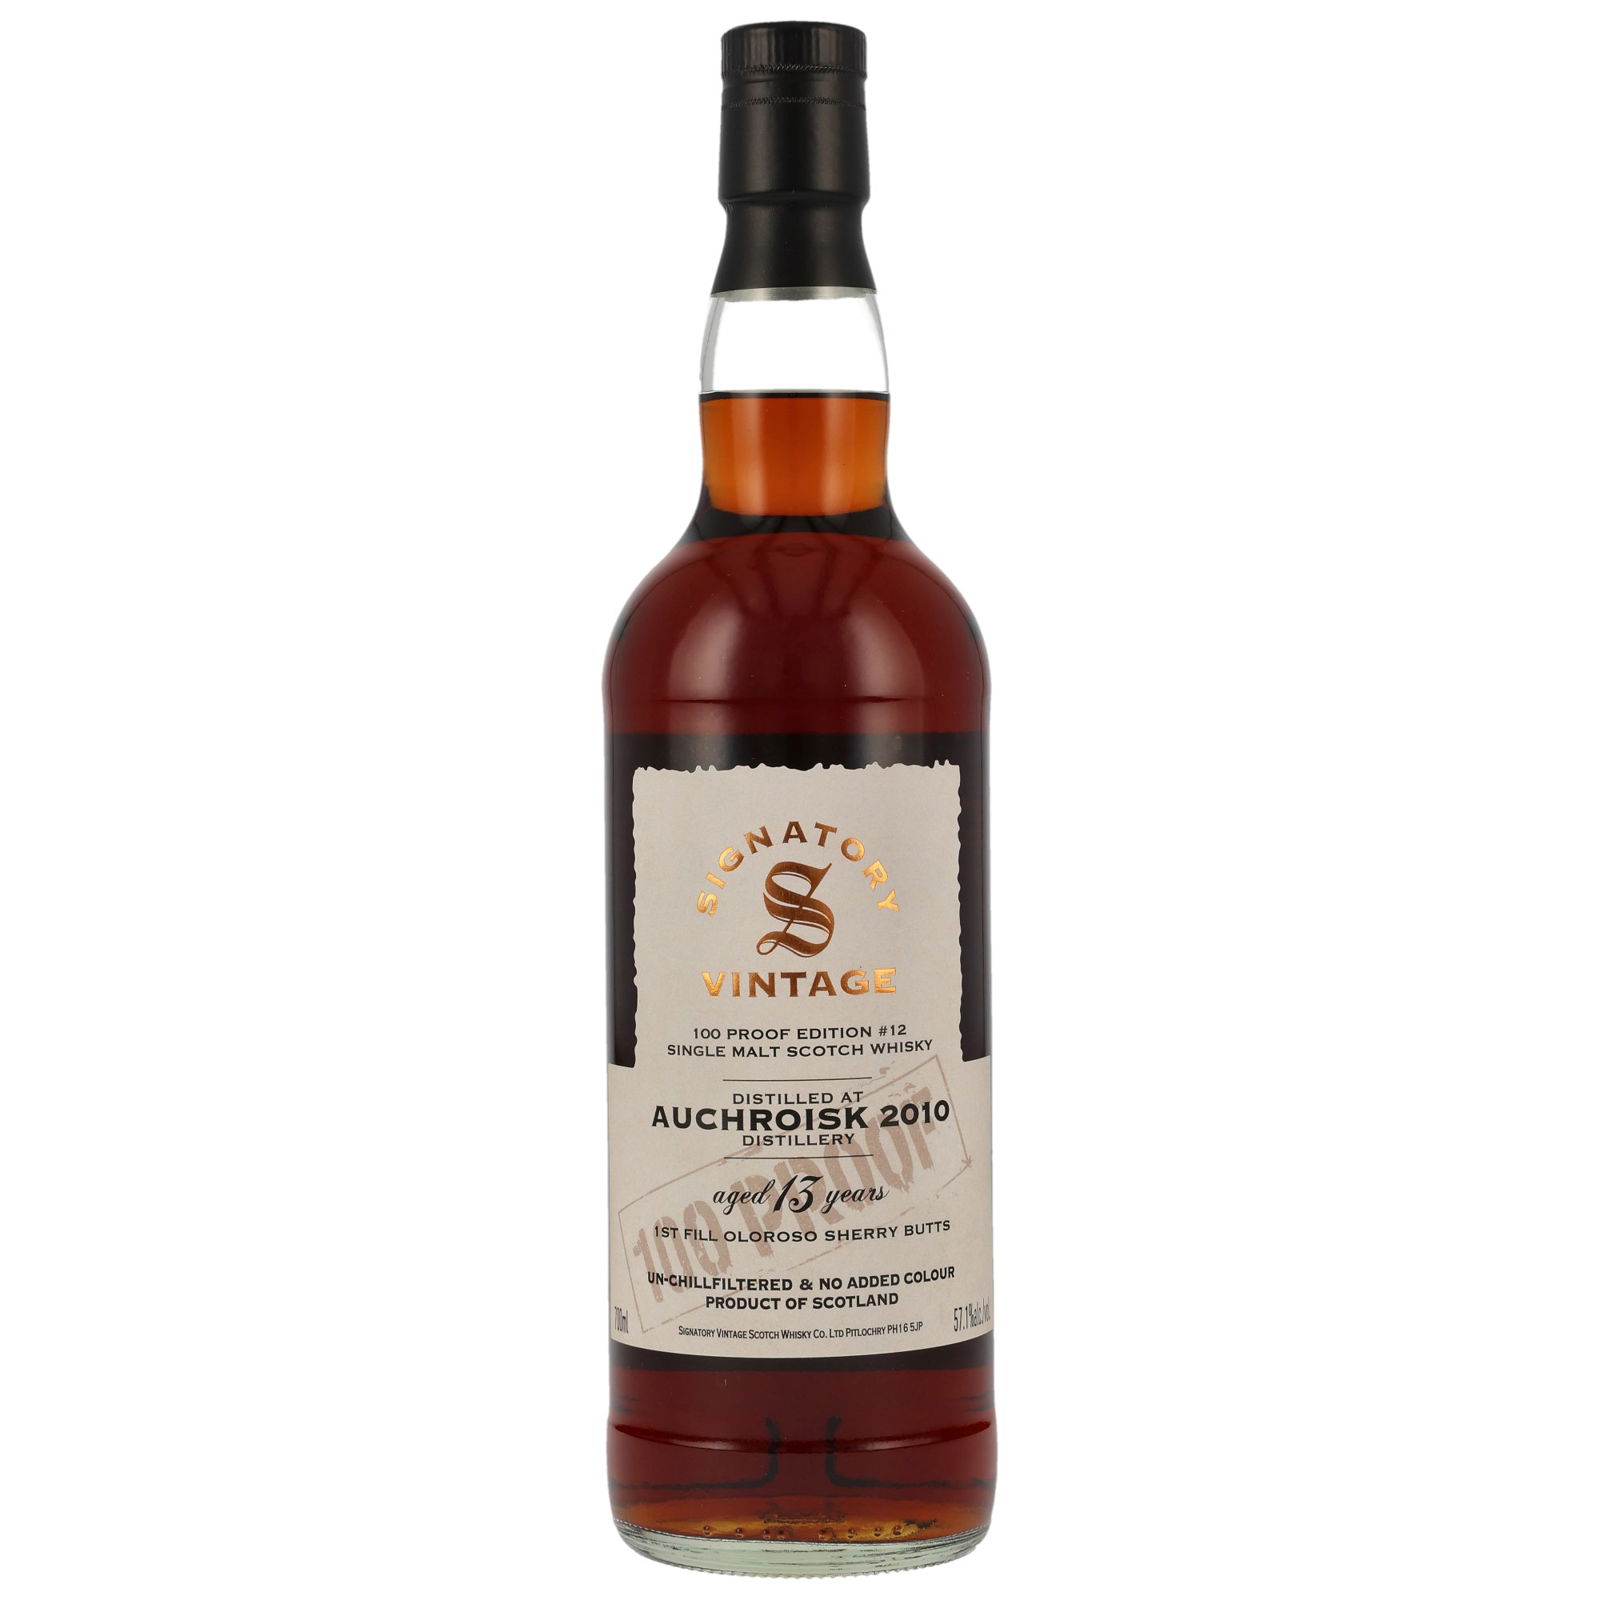 Auchroisk 2010 - 13 Jahre 1st Fill Oloroso Sherry Butts 100 Proof Edition #12 (Signatory)